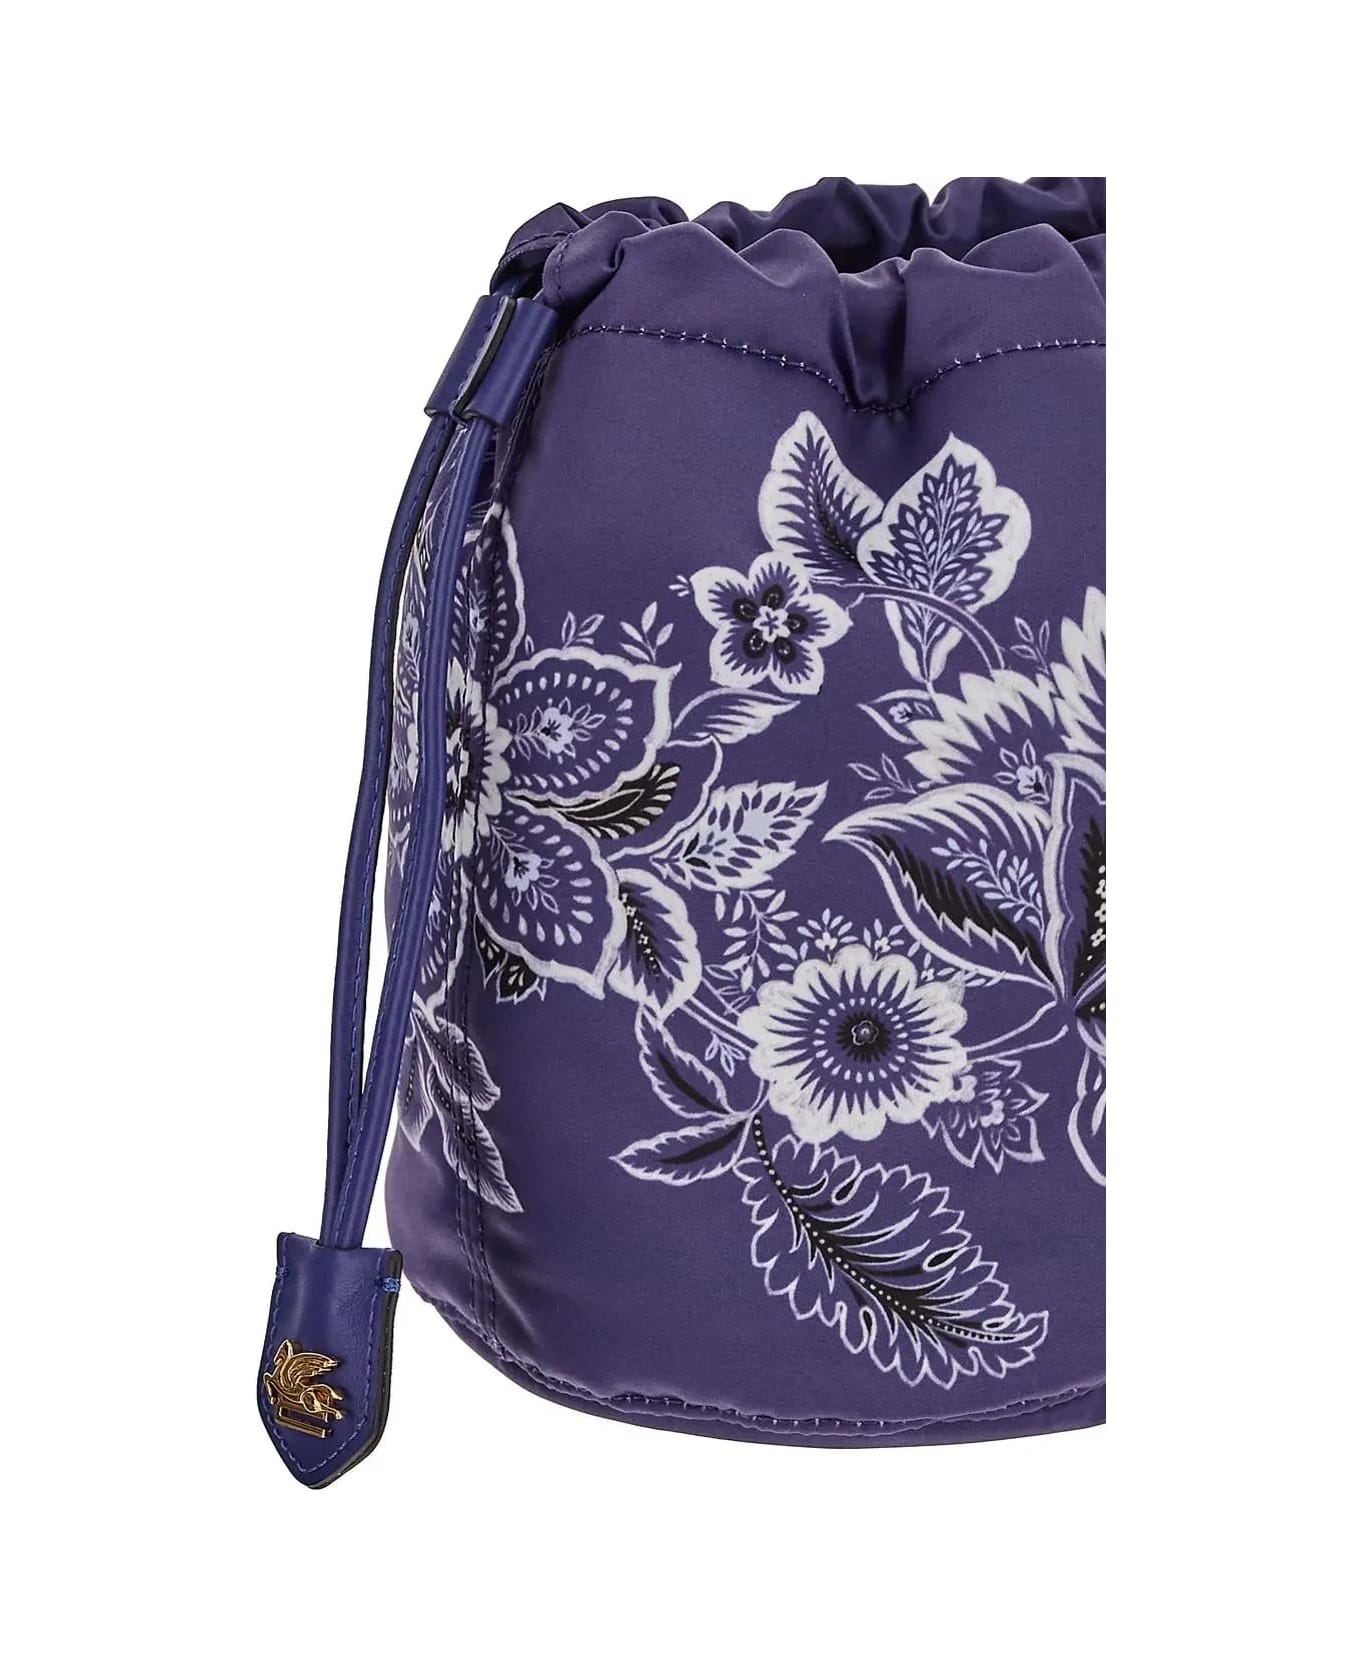 Etro Printed Satin Pouch - BLUE